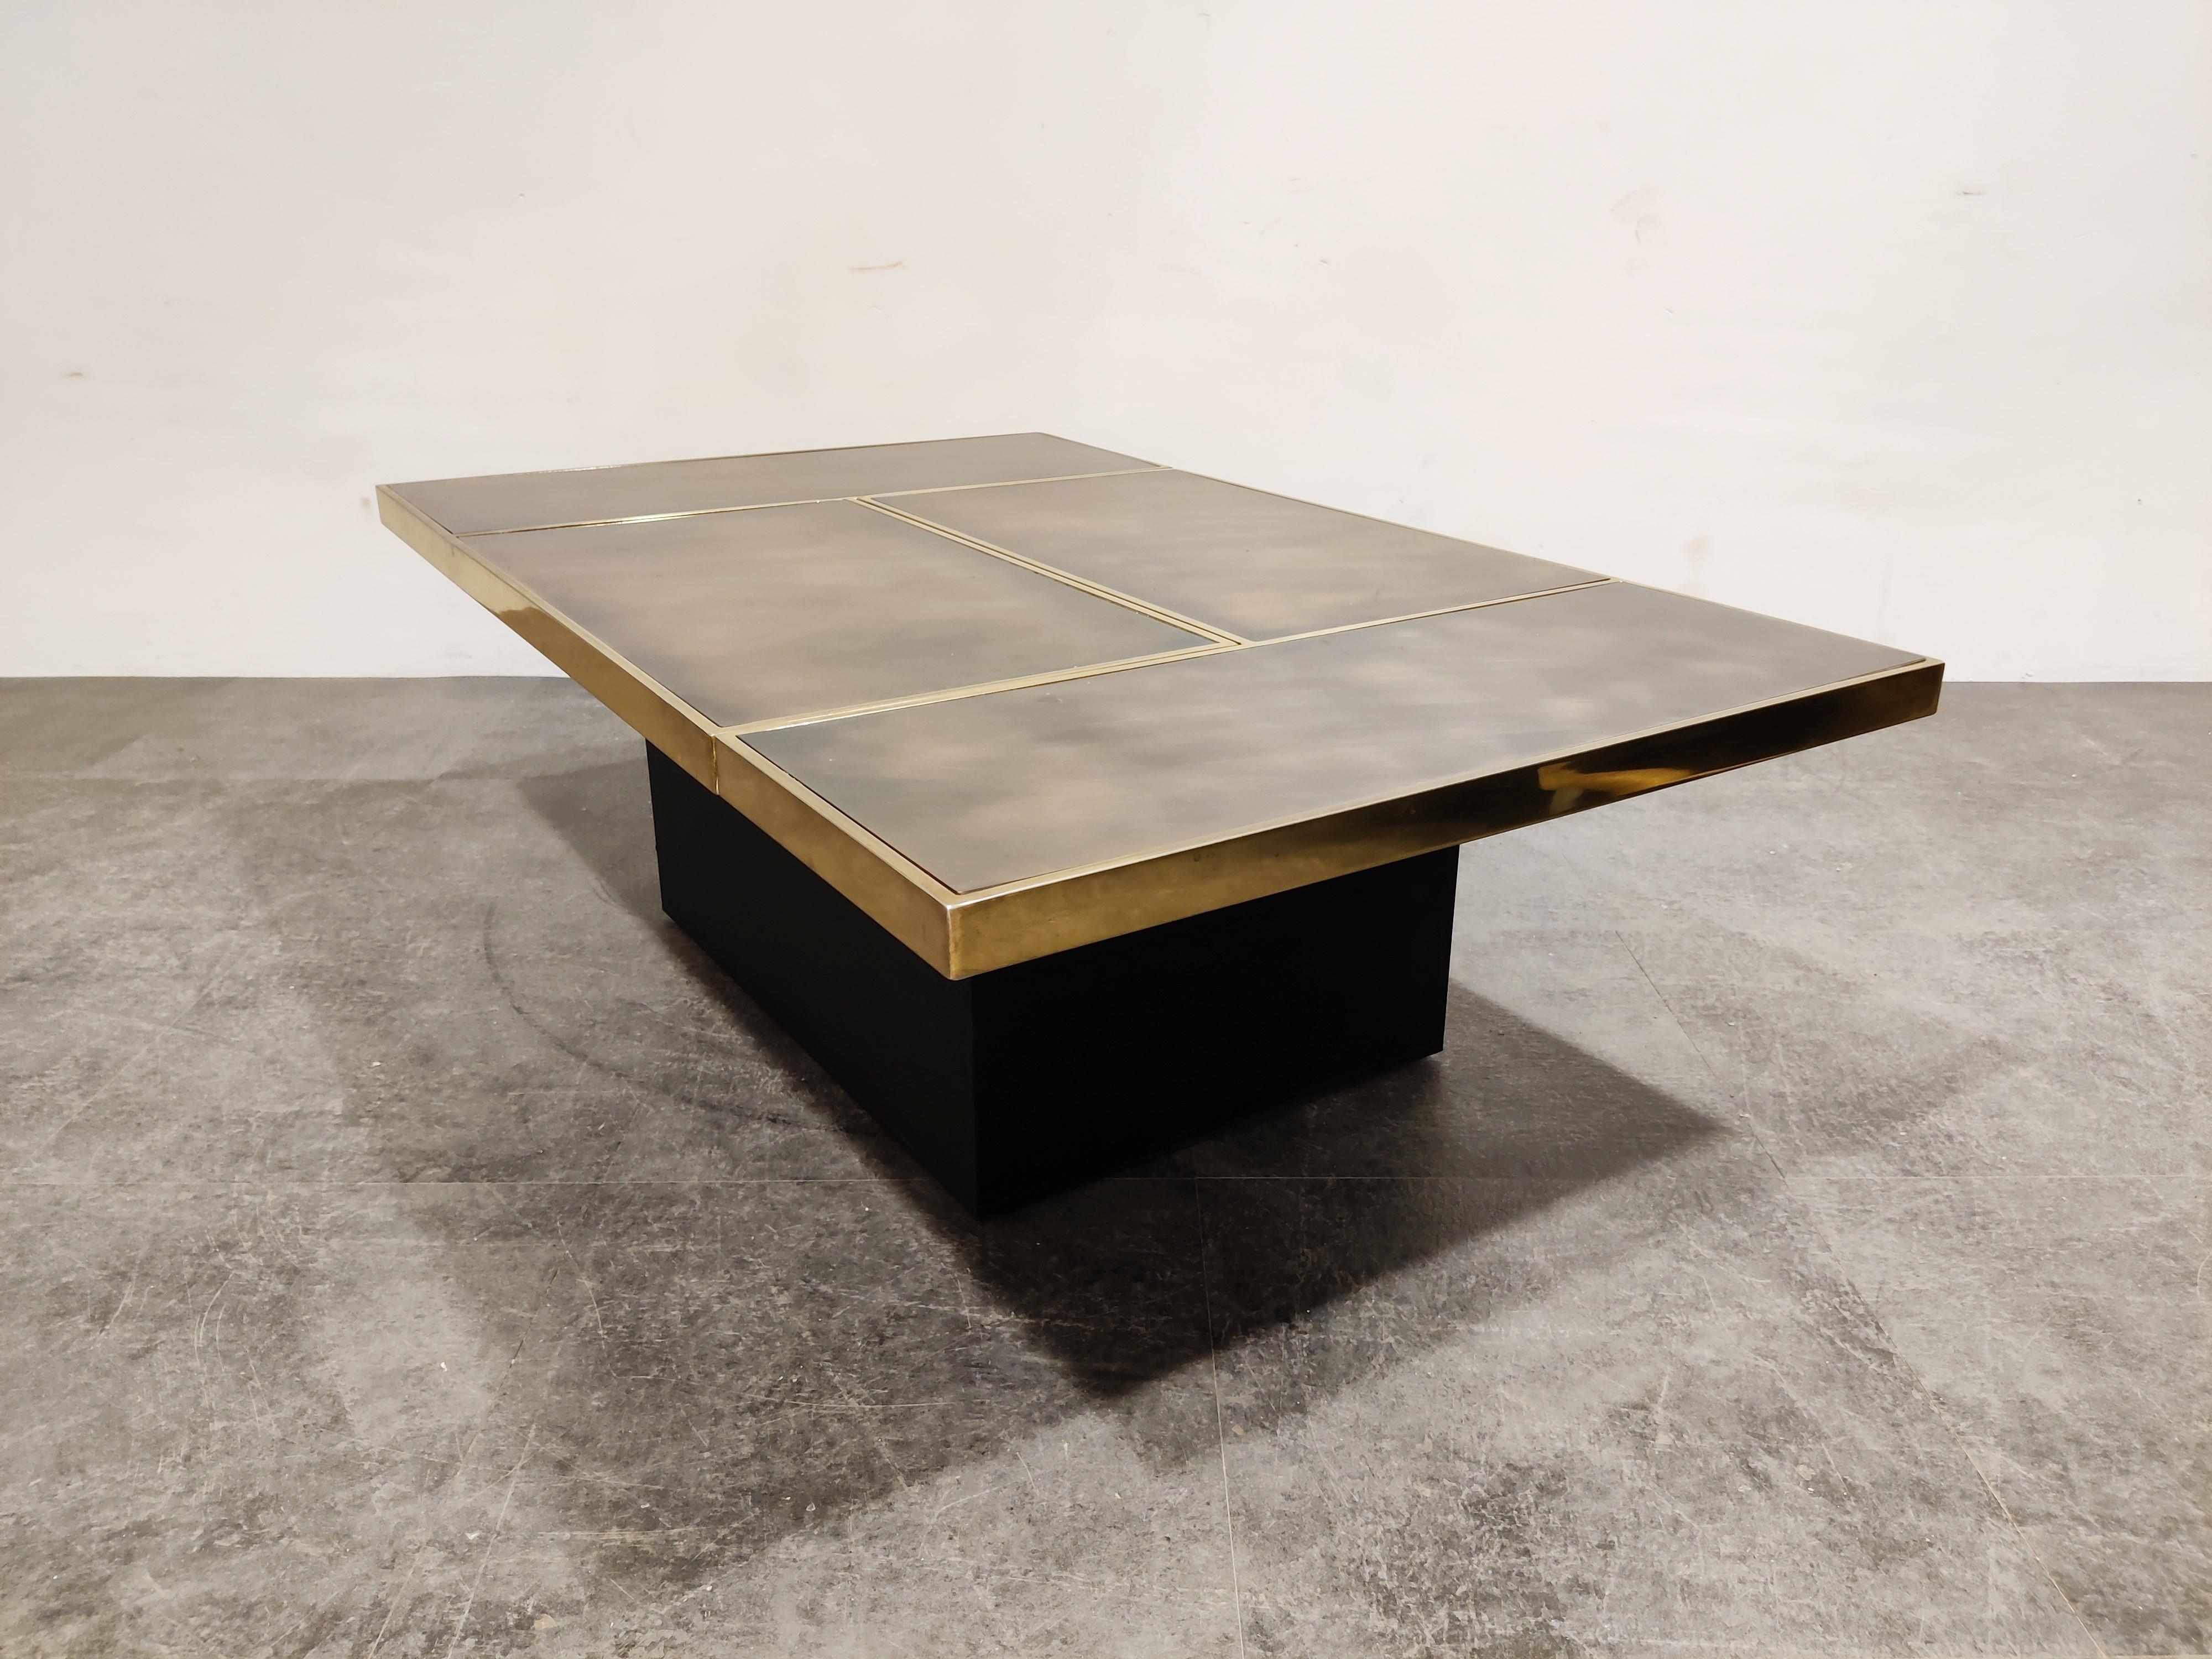 Hidden bar coffee table by Willy Rizzo.

This coffee table consists of two pivoting parts that open up to showcase a mirrored bar compartment.

Brass tables top with inlaid copper plates and a black wooden base.

Good condition.

1970s -